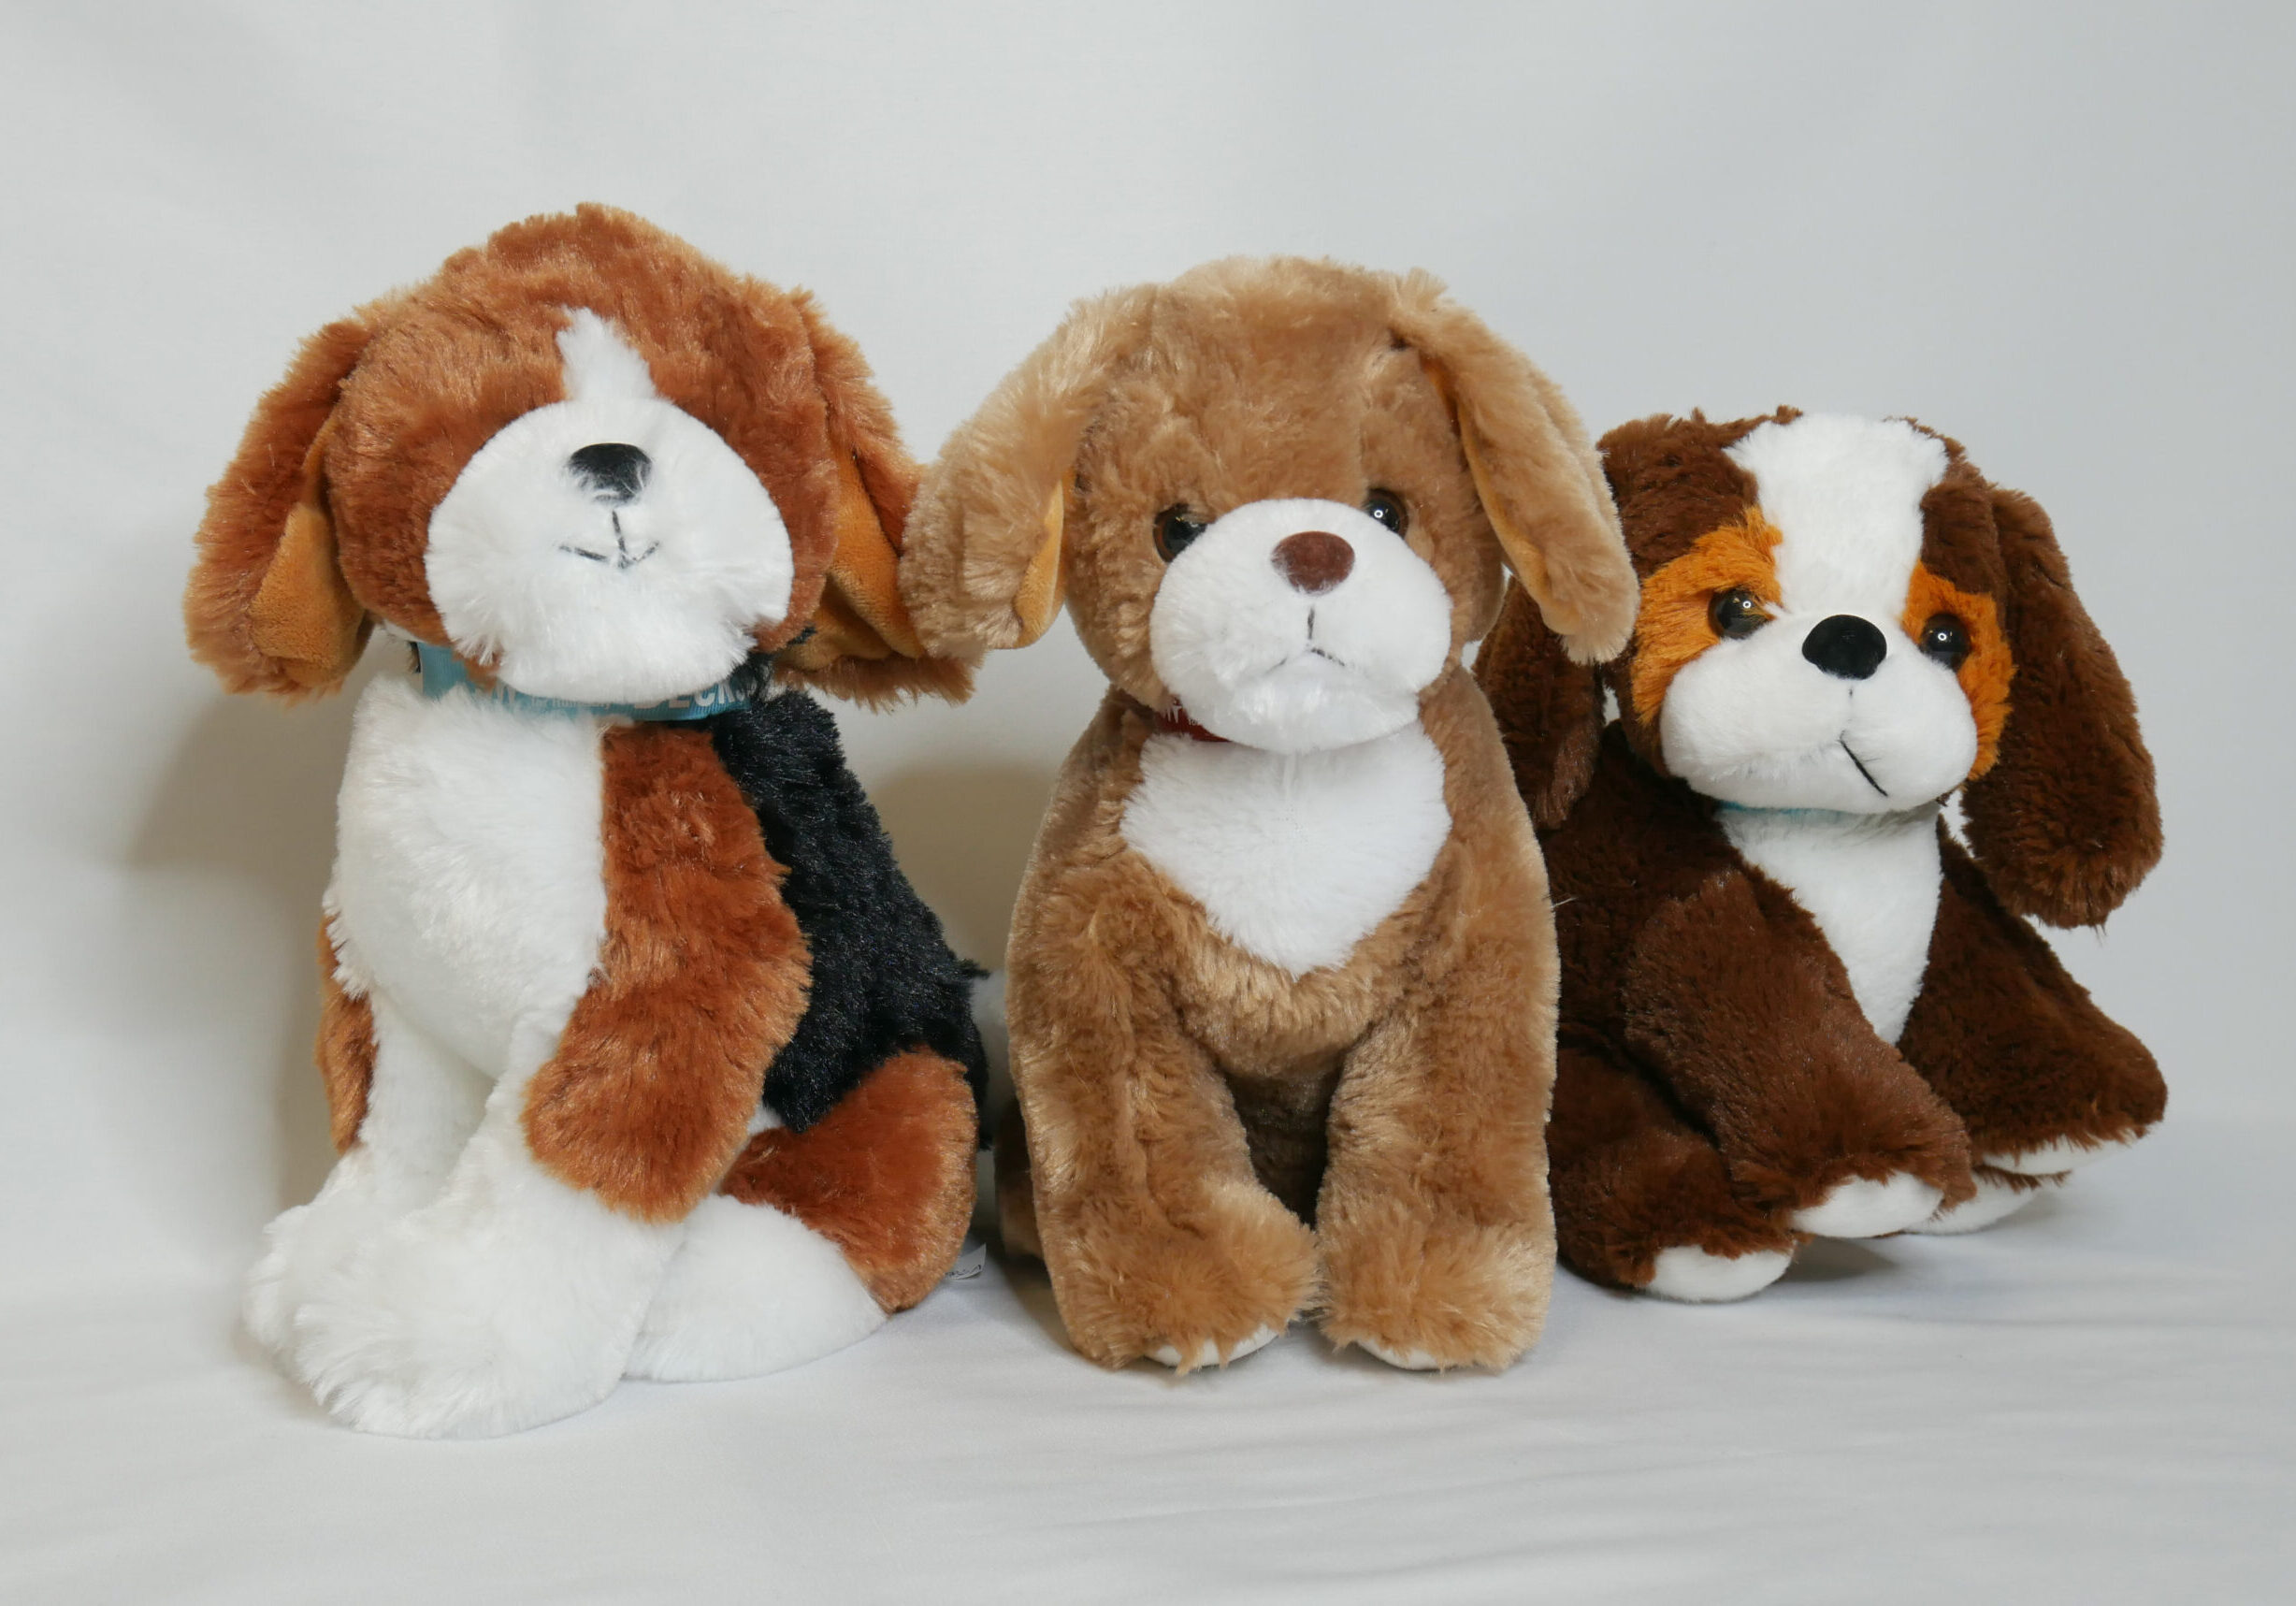 Custom Plush Back-end Freemiums - Fundraising Gift Ideas for Non-Profits, Businesses, and Corporations. All wholesale stuffed animal Back-end Freemiums are custom made to fit the client's branding needs.